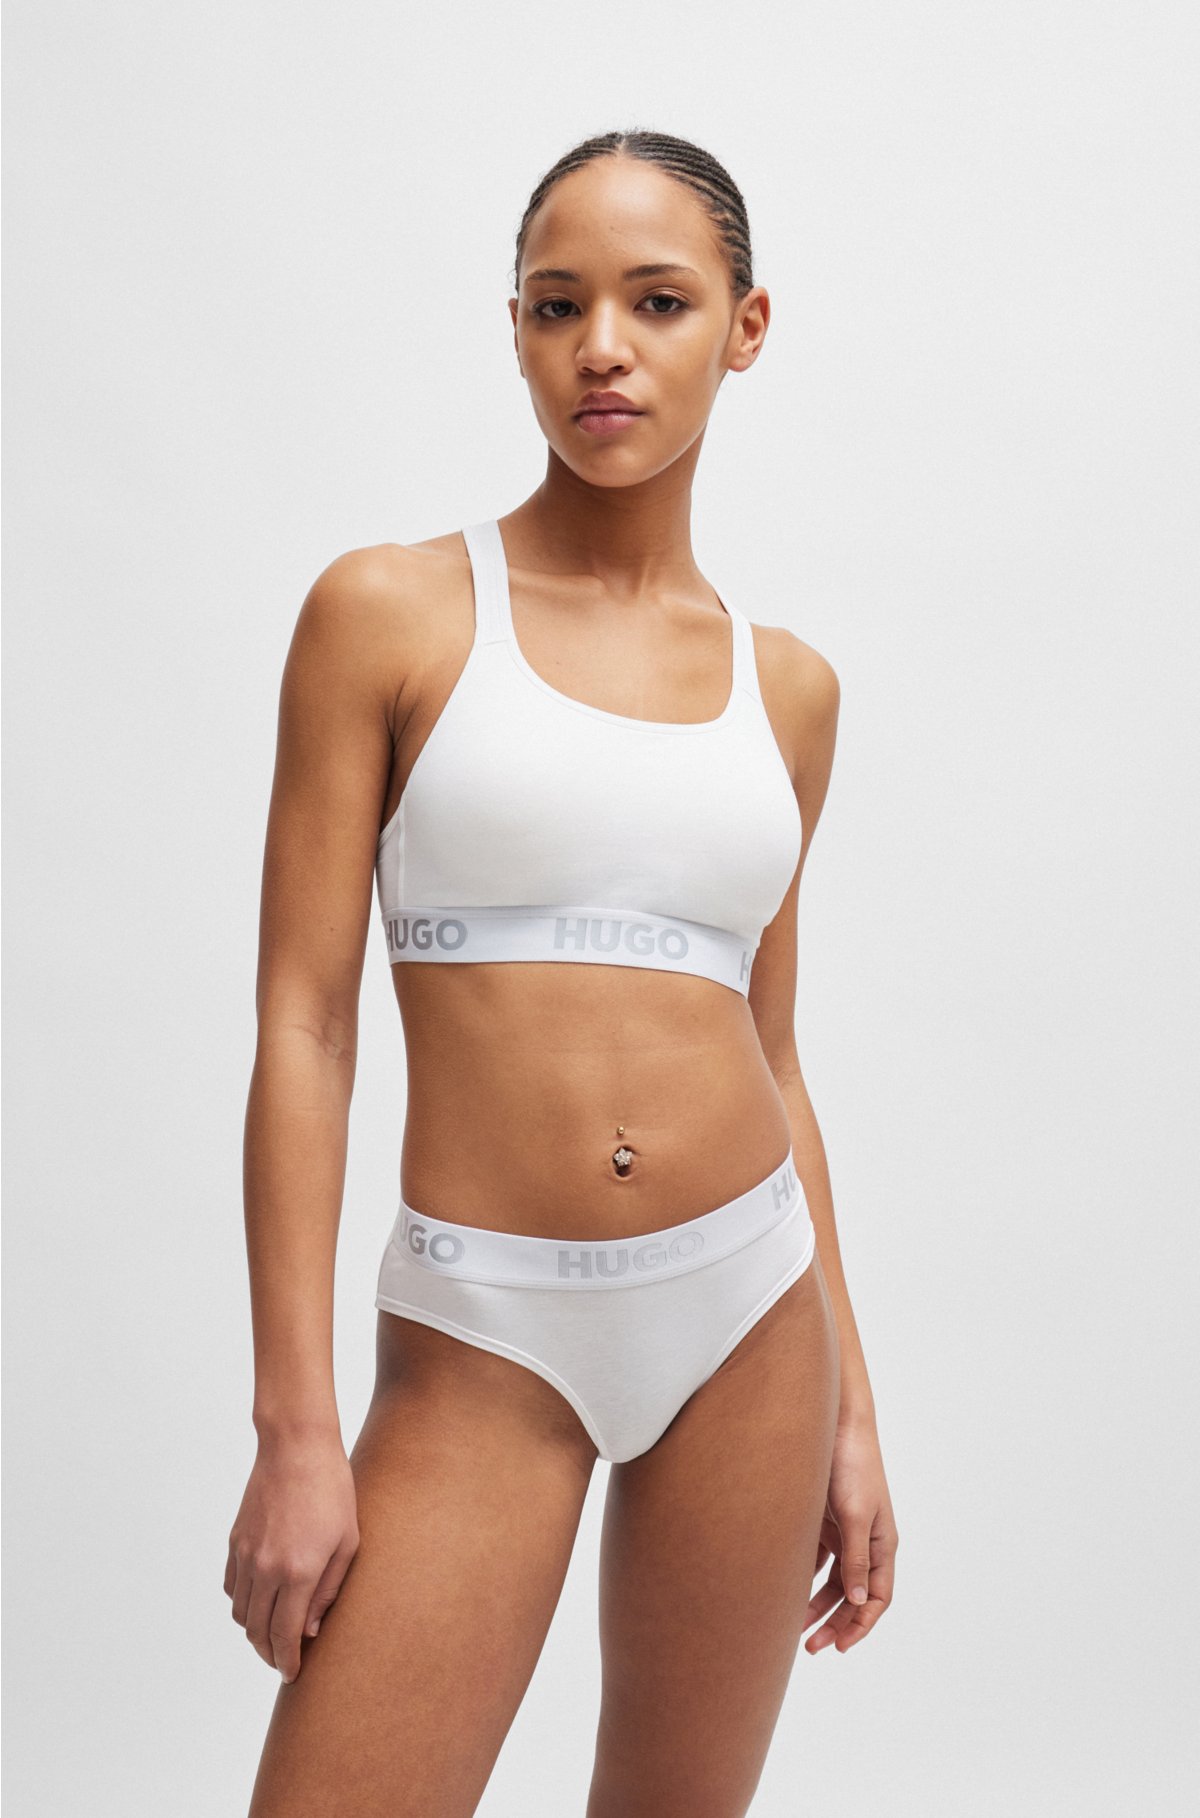 cotton - with stretch bra logos HUGO in repeat Sports